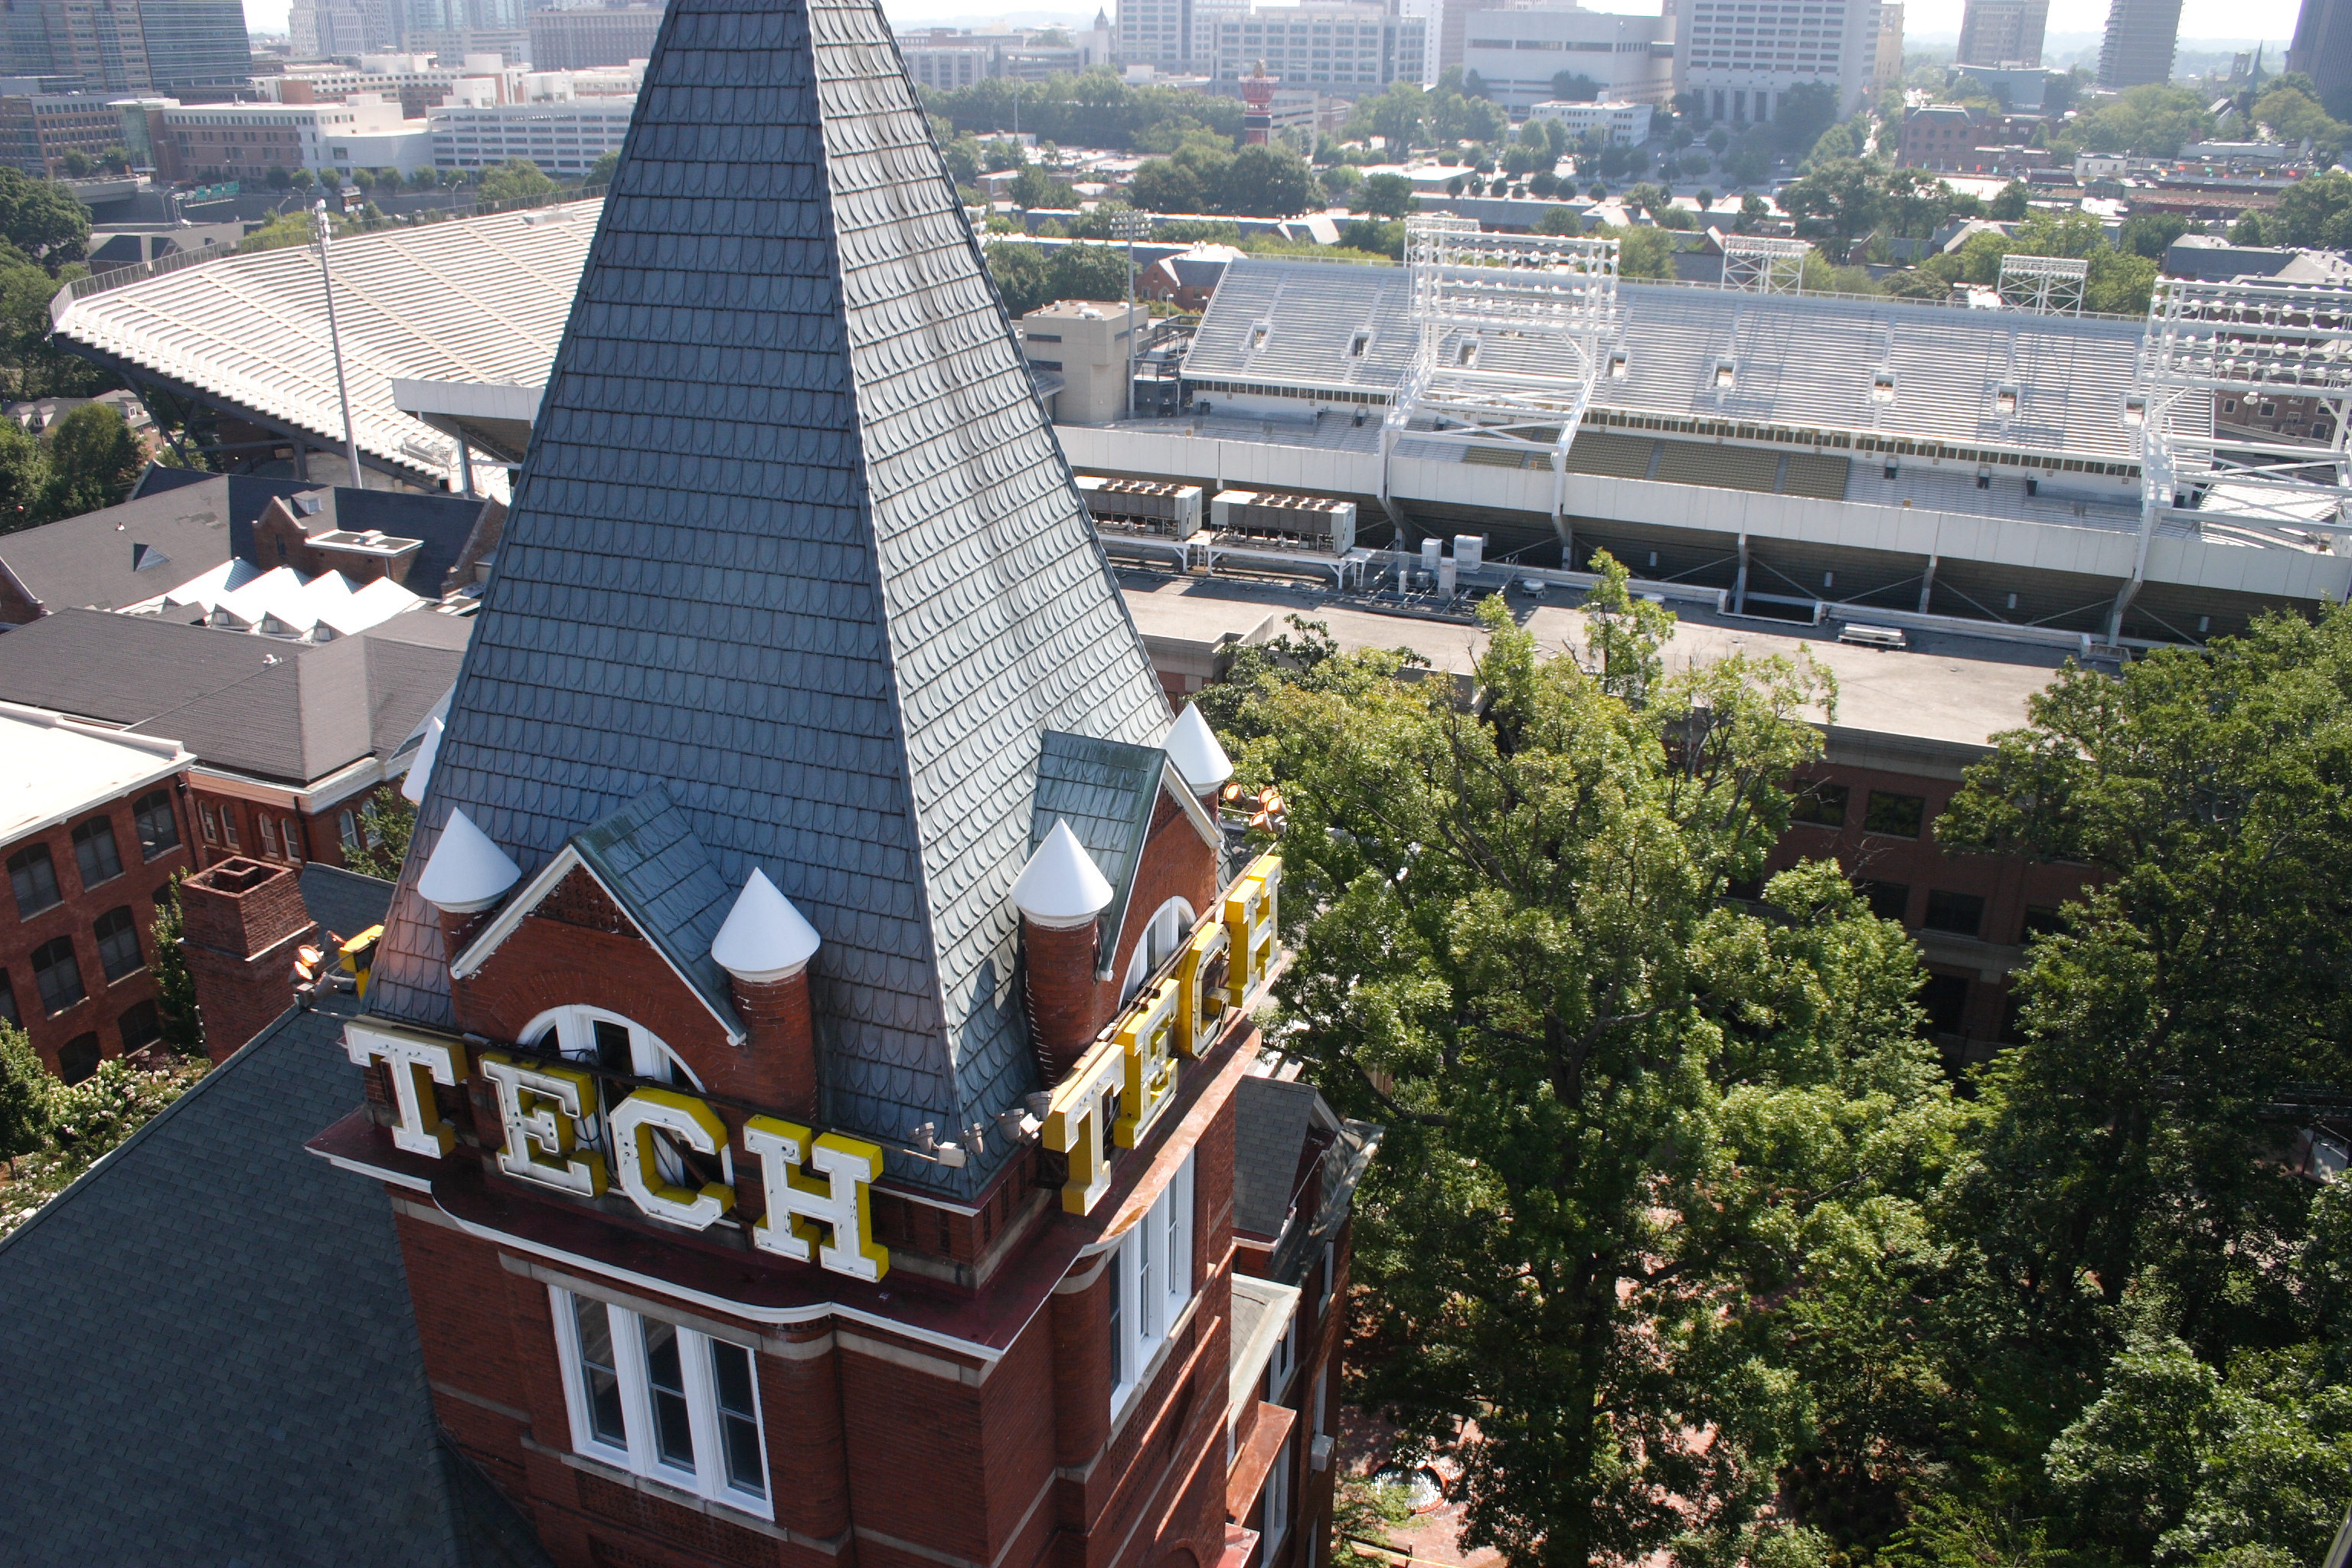 According to the 2014 Academic Ranking of World Universities (ARWU) by Shanghai Jiao Tong University, Georgia Tech's engineering programs are sixth best in the world. Several other Georgia Tech programs rank in the top 50.